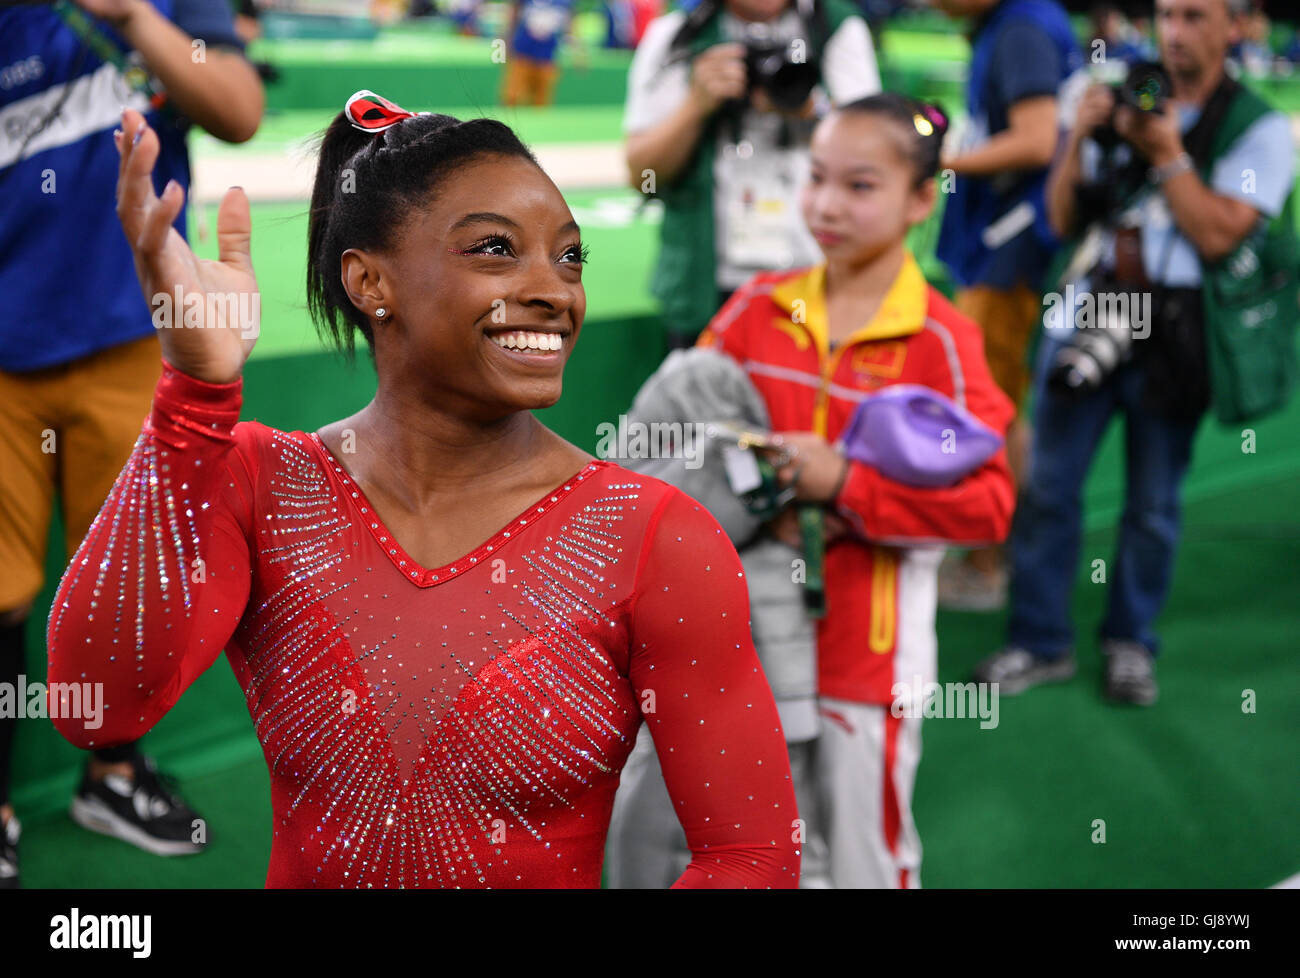 Rio de Janeiro, Brazil. 14th Aug, 2016. Simone Biles of the USA smiles during the Women's Vault Final at the Artistic Gymnastics events of the Rio 2016 Olympic Games at the Rio Olympic Arena in Rio de Janeiro, Brazil, 14 August 2016. Biles won the Gold medal. Photo: Lukas Schulze/dpa/Alamy Live News Stock Photo